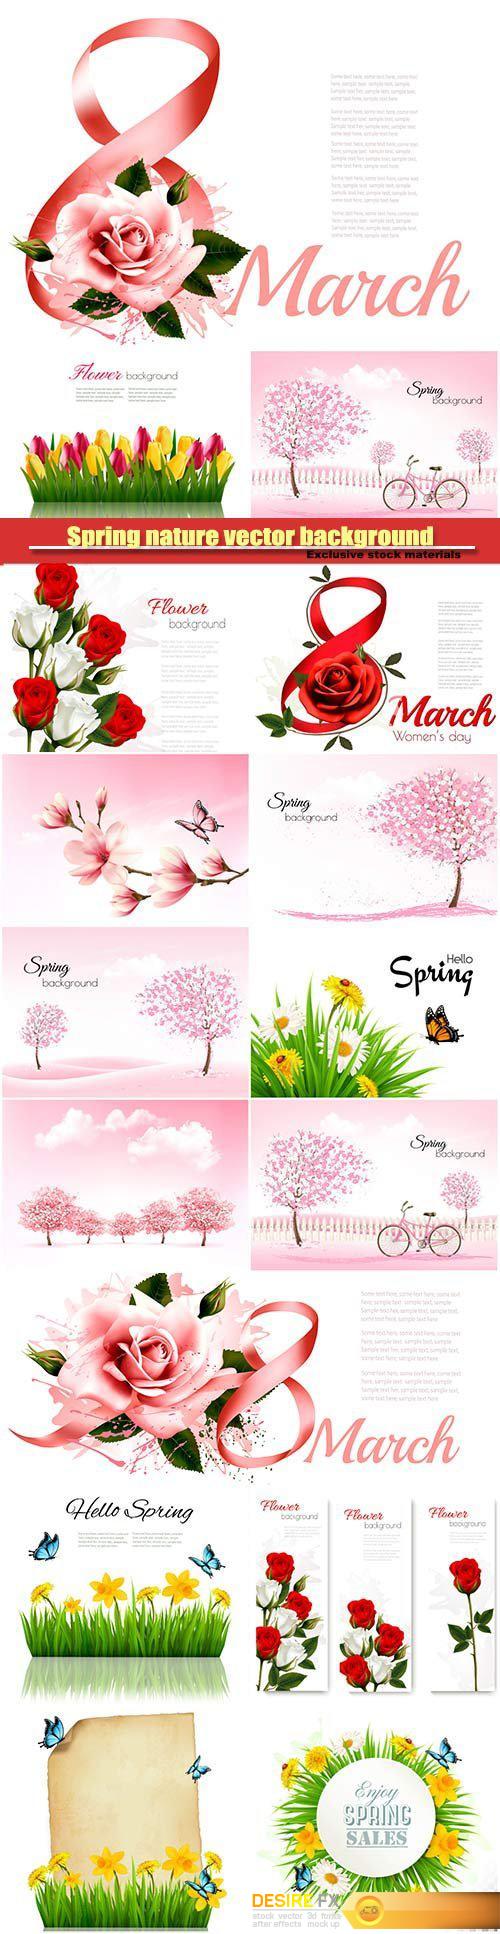 8th March illustration with rose, women's day, spring nature vector background